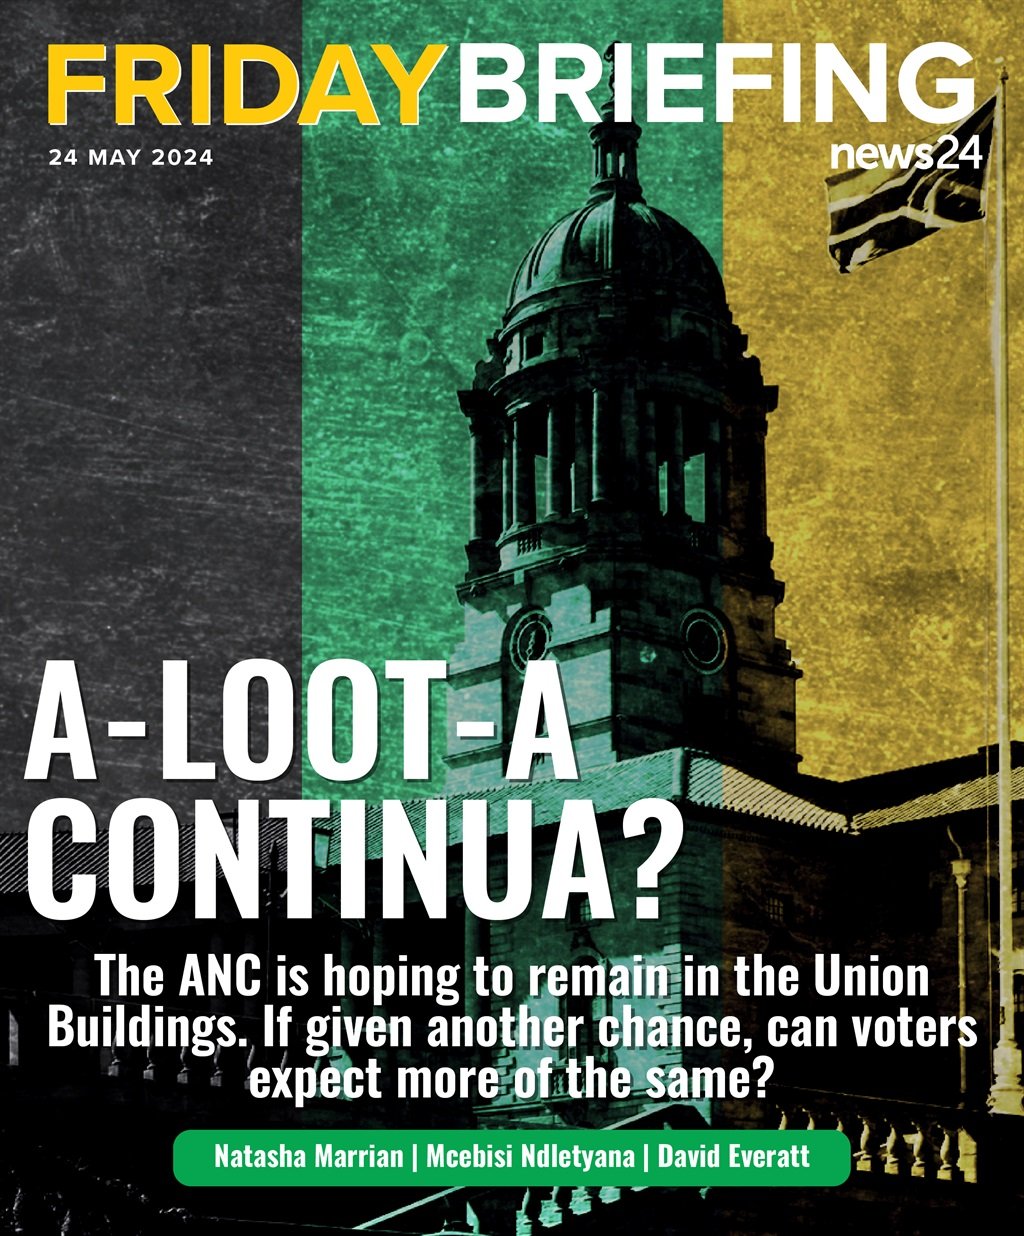 News24 | FRIDAY BRIEFING | A-loot-a continua: Should we expect more of the same from ANC beyond 2024?